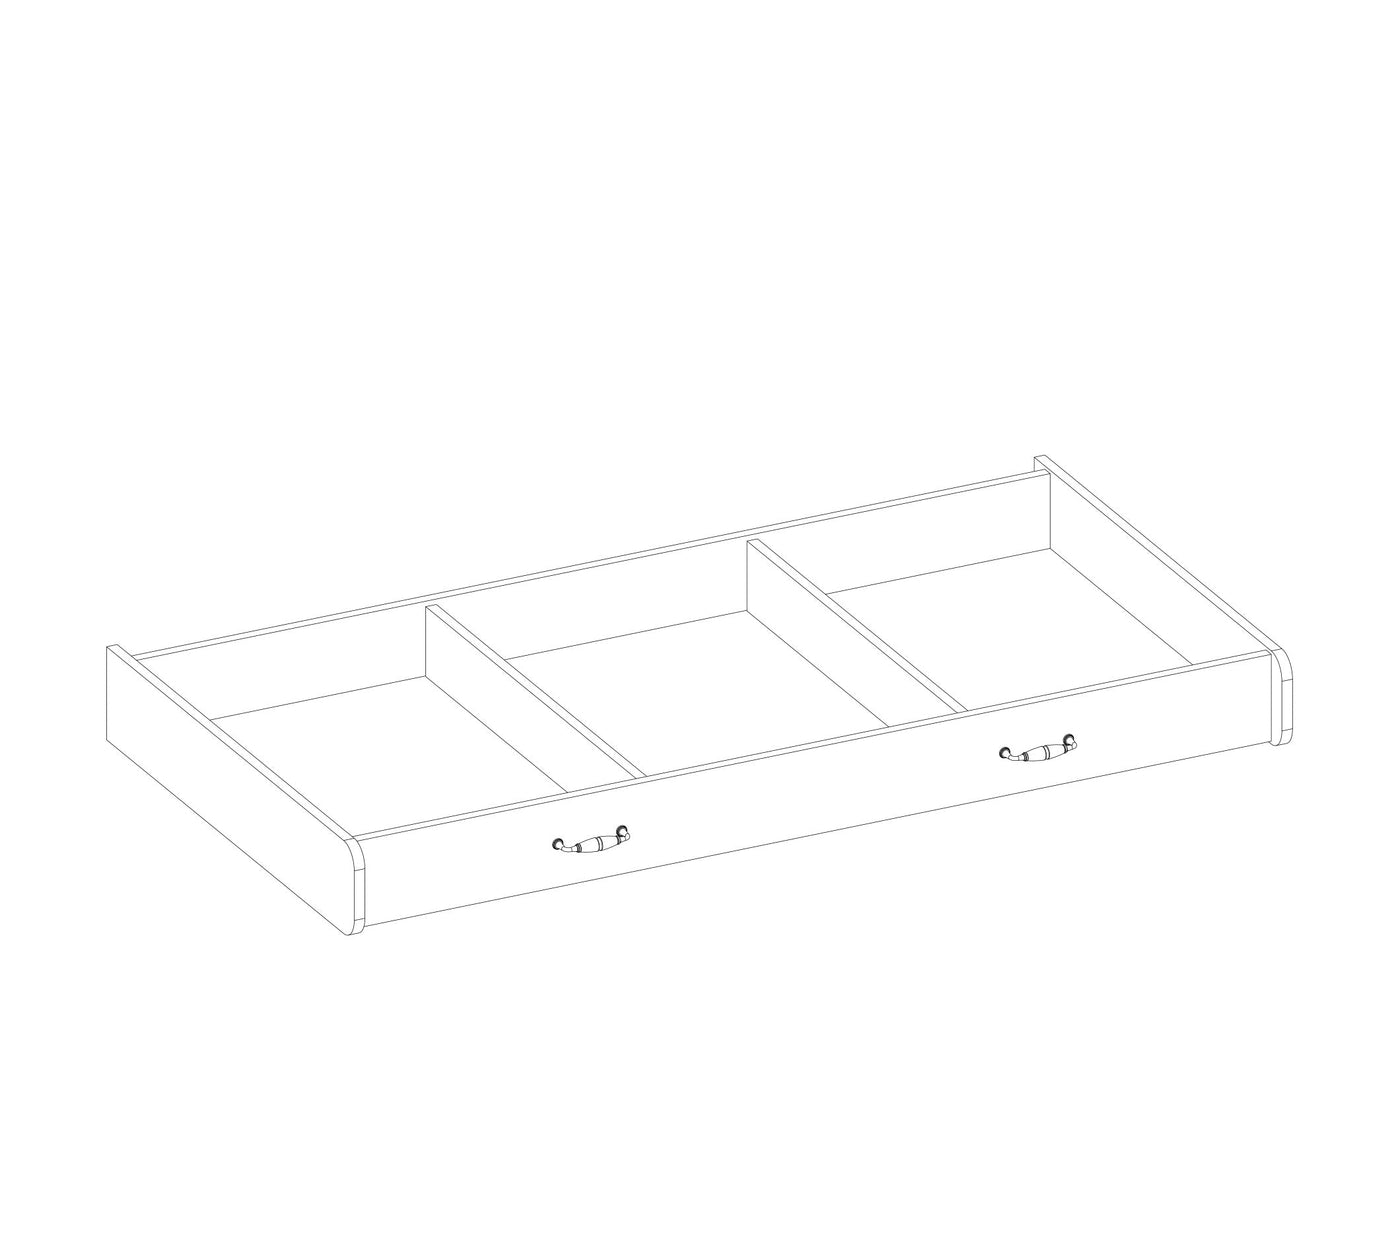 Selena Baby Bed Pull-out Drawer